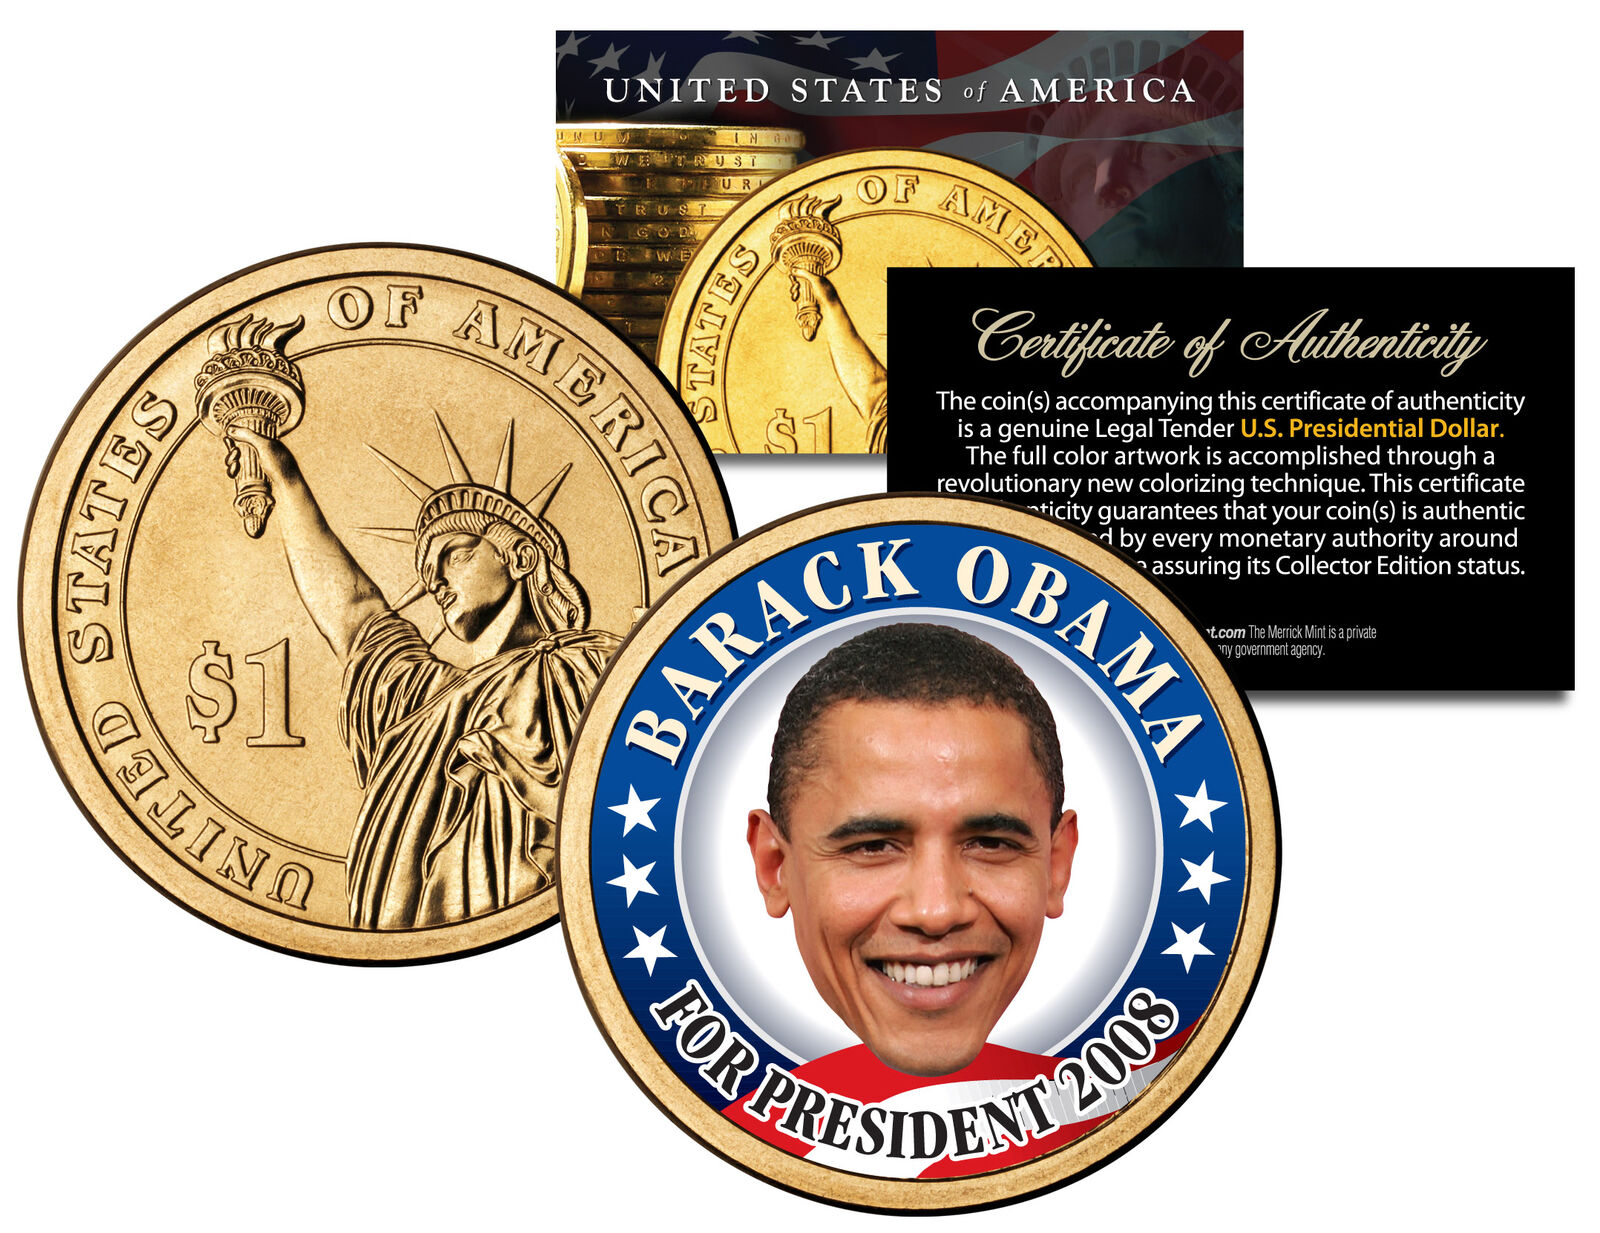 BARACK OBAMA FOR PRESIDENT 2008 Rare Campaign Issue Presidential $1 Dollar Coin